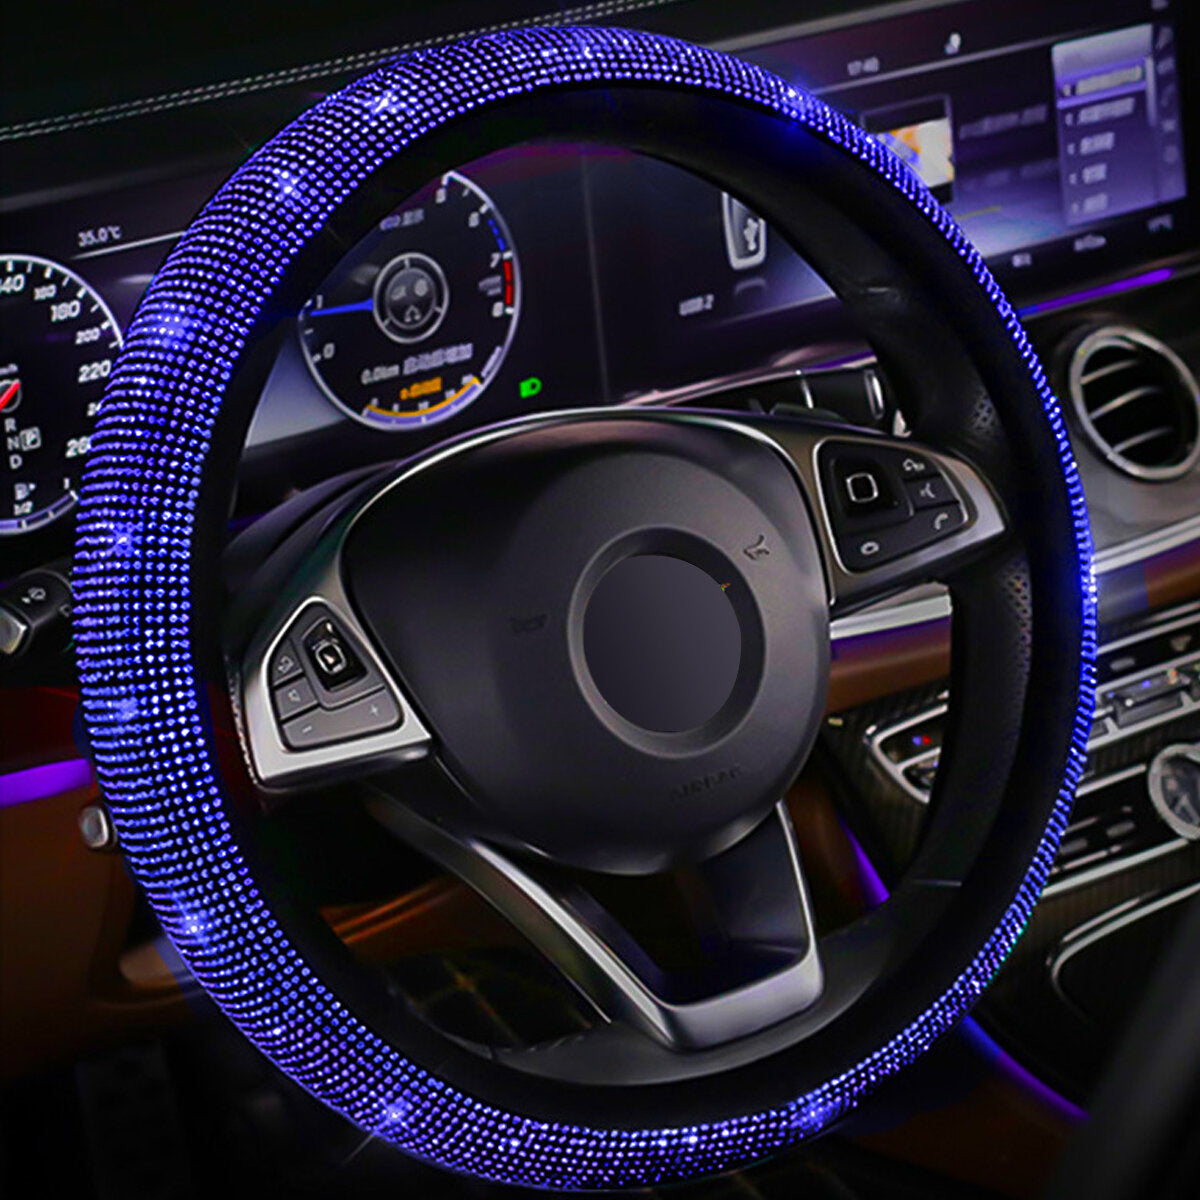 Car Steering Wheel Cover Luxury Bling Sparkle Accessories Decor